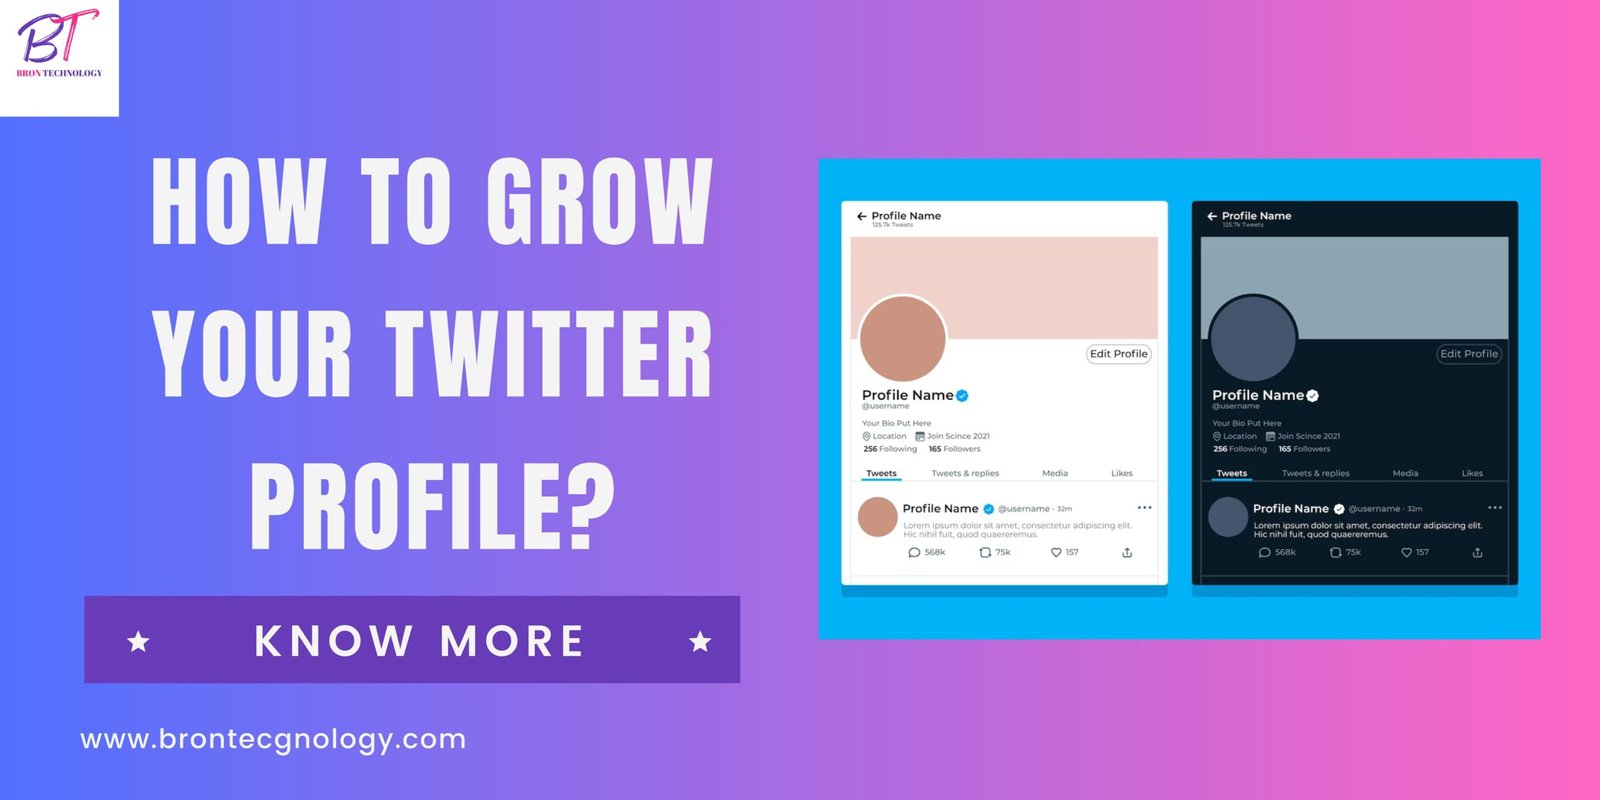 How to Grow Your Twitter Profile